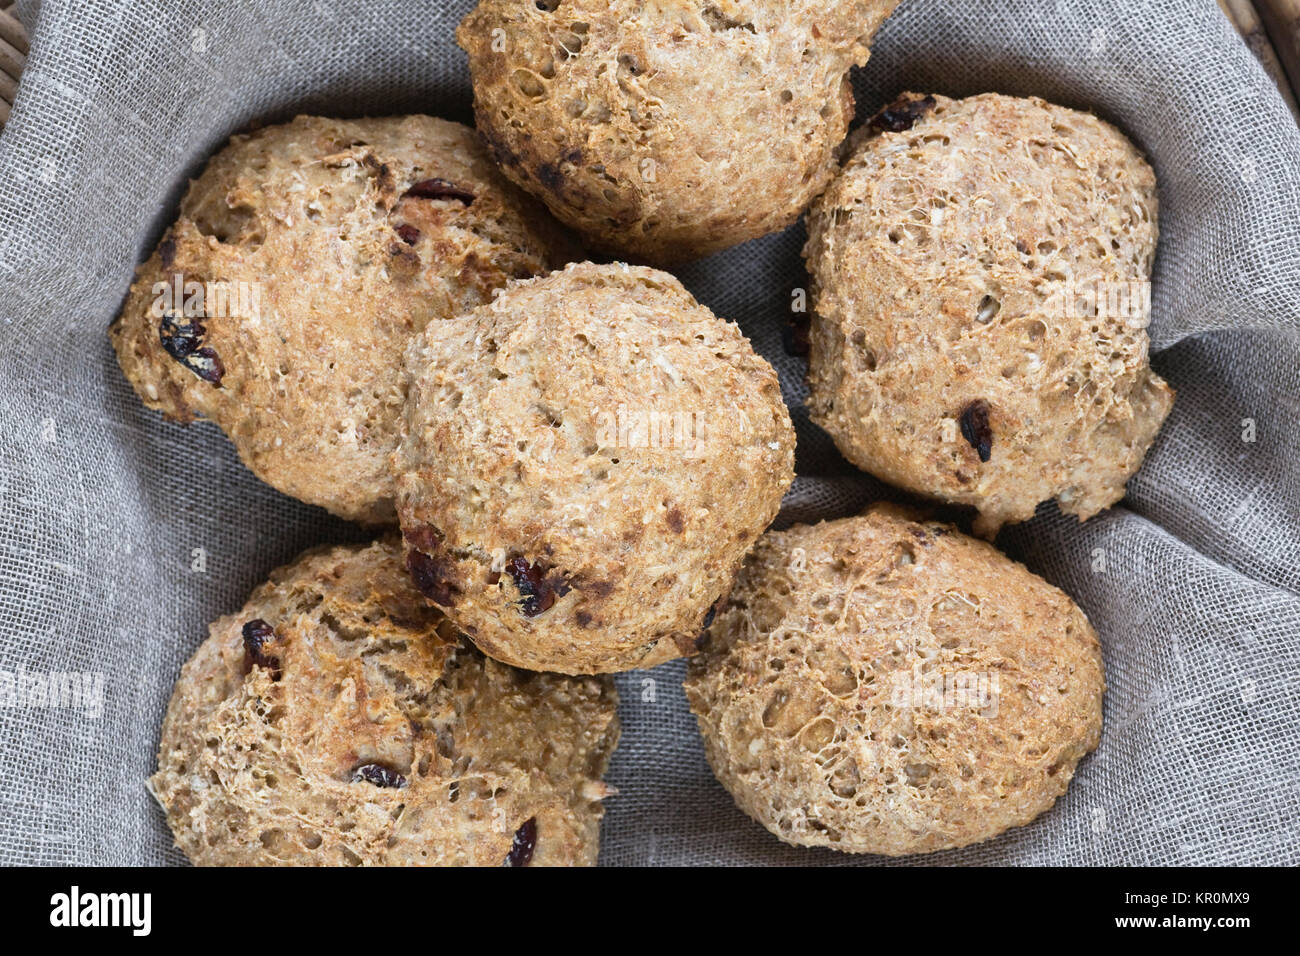 Homemade spelt and cranberry bread rolls. Stock Photo